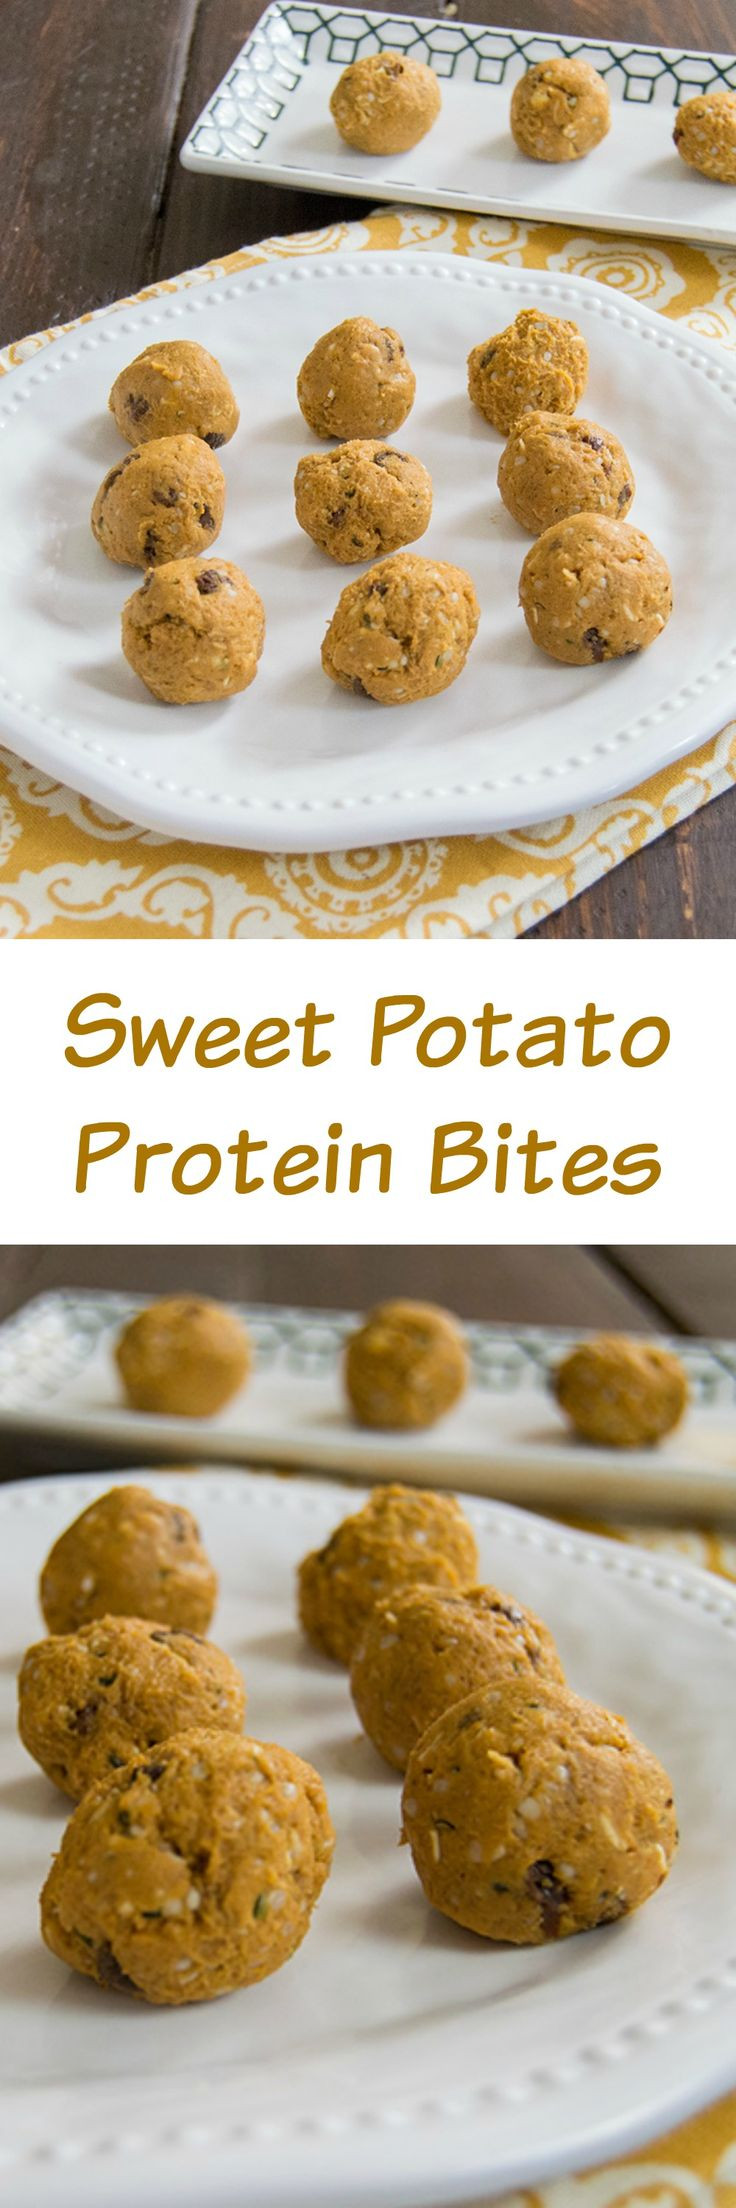 Sweet Potato Protein
 17 Best images about Food that are high in iron protein